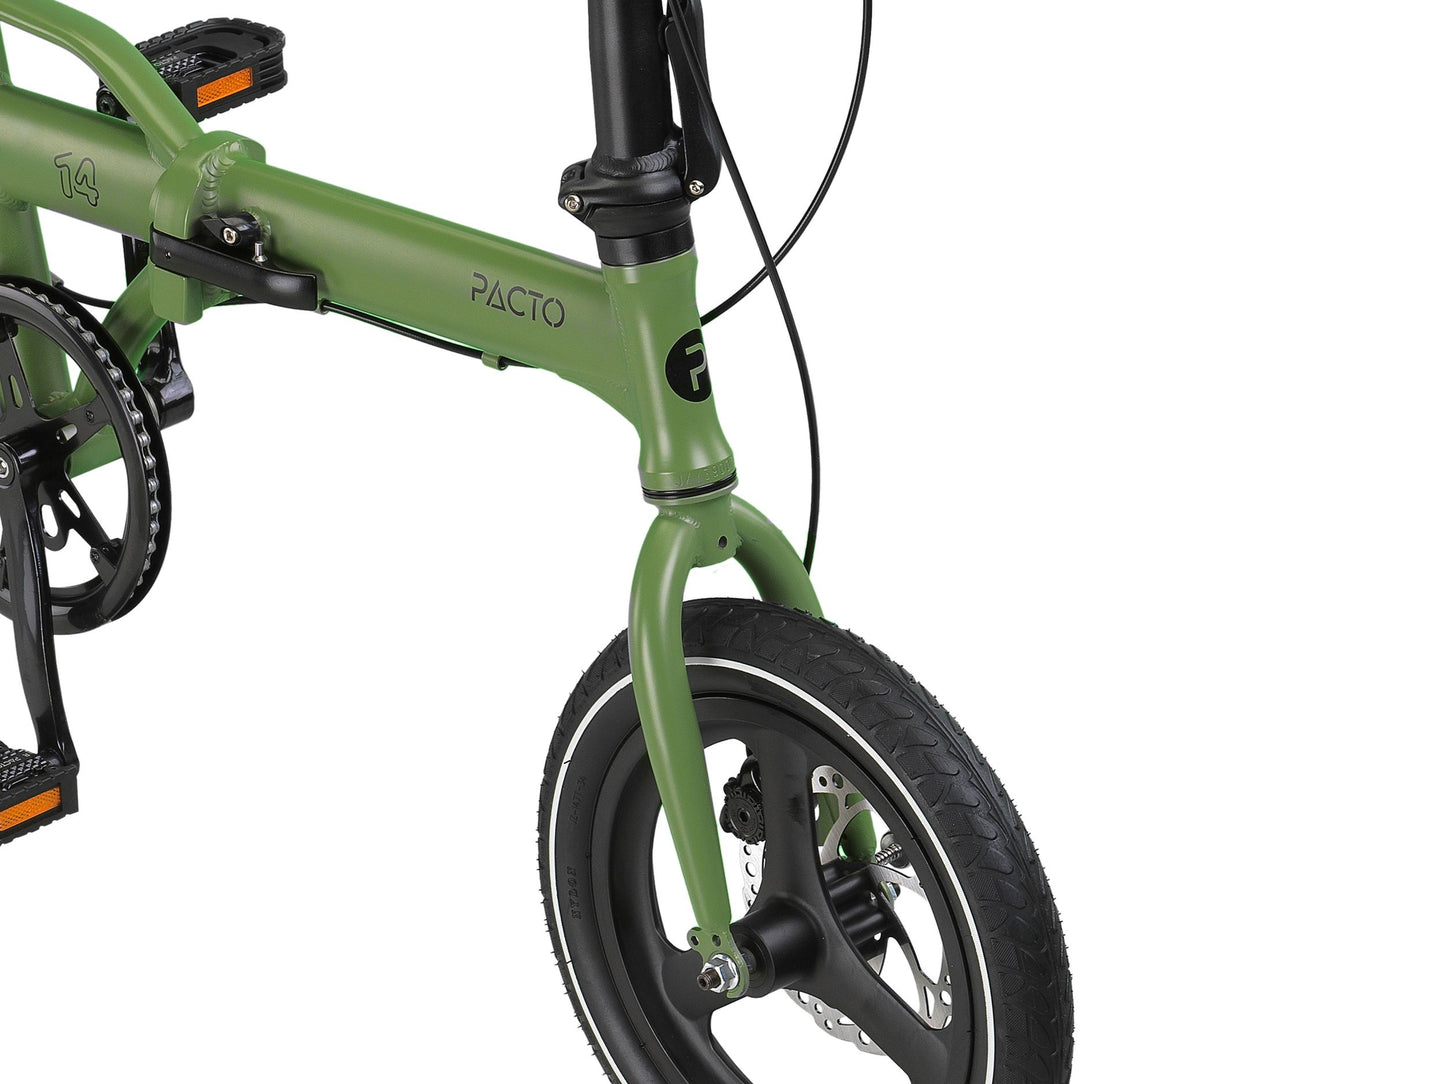 PACTO - 14 - Vouwfiets - Army green/ Zwart